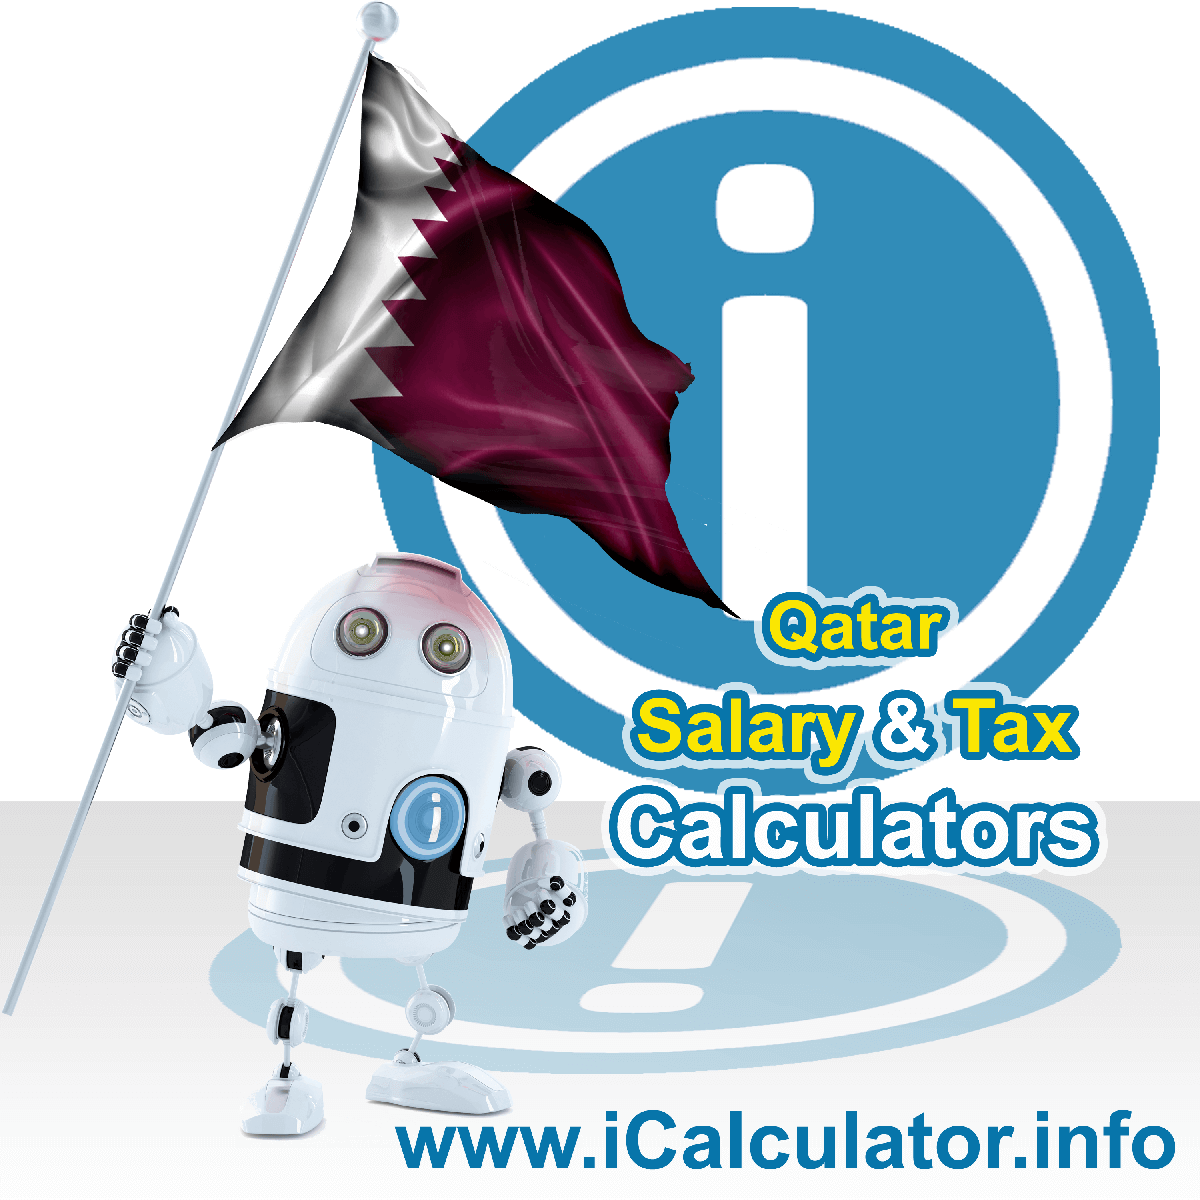 Qatar Tax Calculator. This image shows the Qatar flag and information relating to the tax formula for the Qatar Salary Calculator